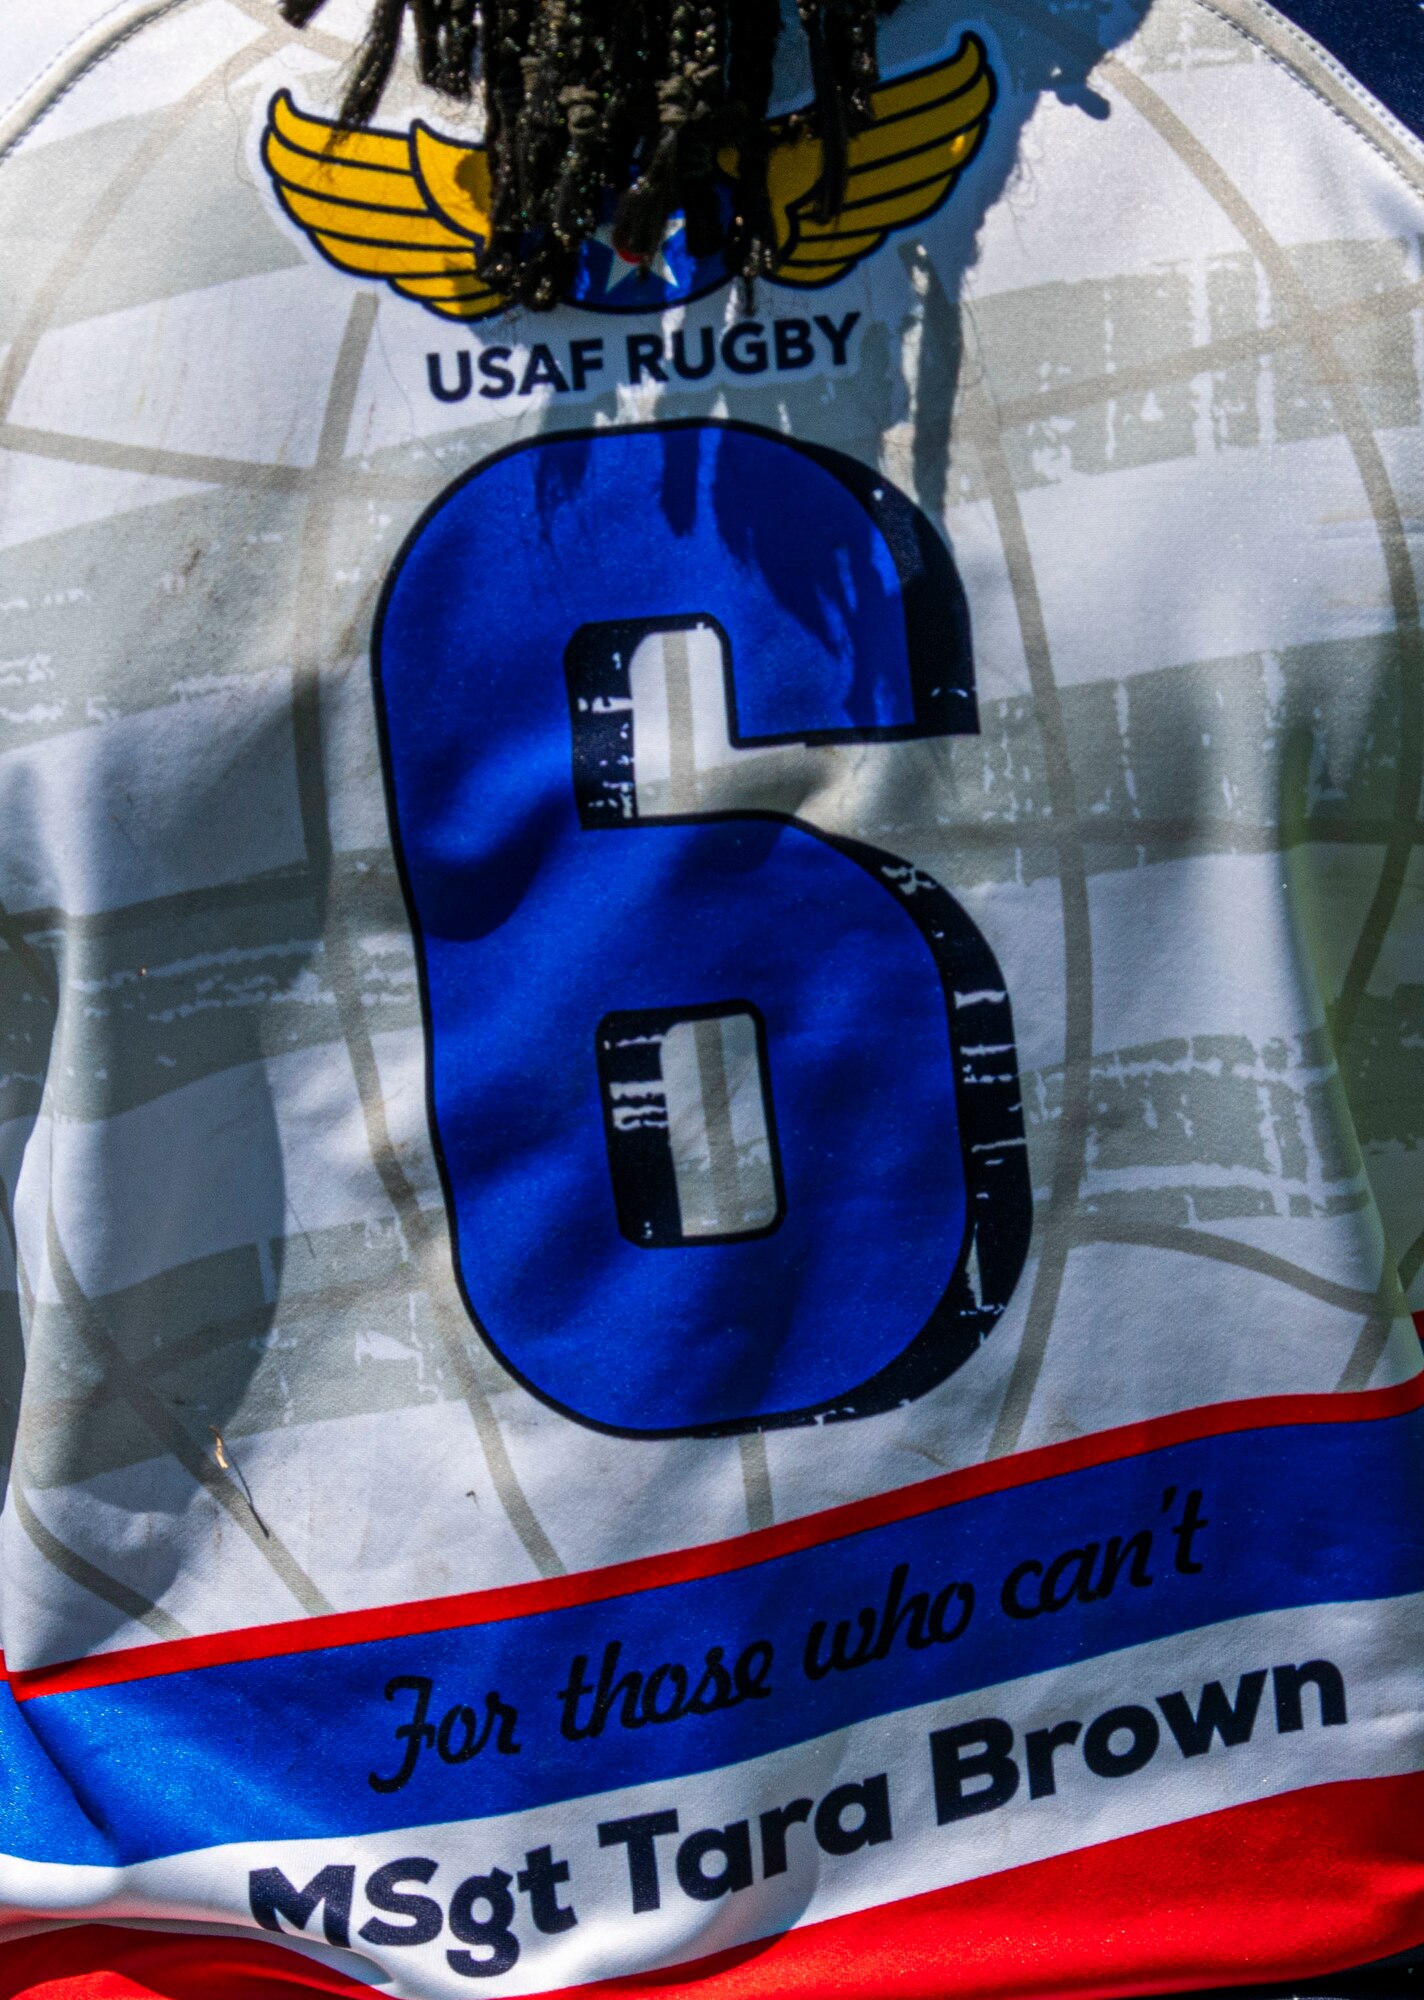 Tech Sgt. Cheryl Johnson, 89th Presidential Logistics Squadron supply technician and a member of the Department of Air Force Women’s Rugby Team, displays the name of a fallen Air Force service member on her back at the game against the Northern Virginia Rugby Team after competing in the Annual Armed Forces Women’s Rugby Championship in Wilmington, North Carolina, June 26, 2022. Each player wore a fallen service member's name on their shirts to remember those who died in the line of duty. (U.S. Air Force photo by Airman 1st Class Sabrina Fuller)